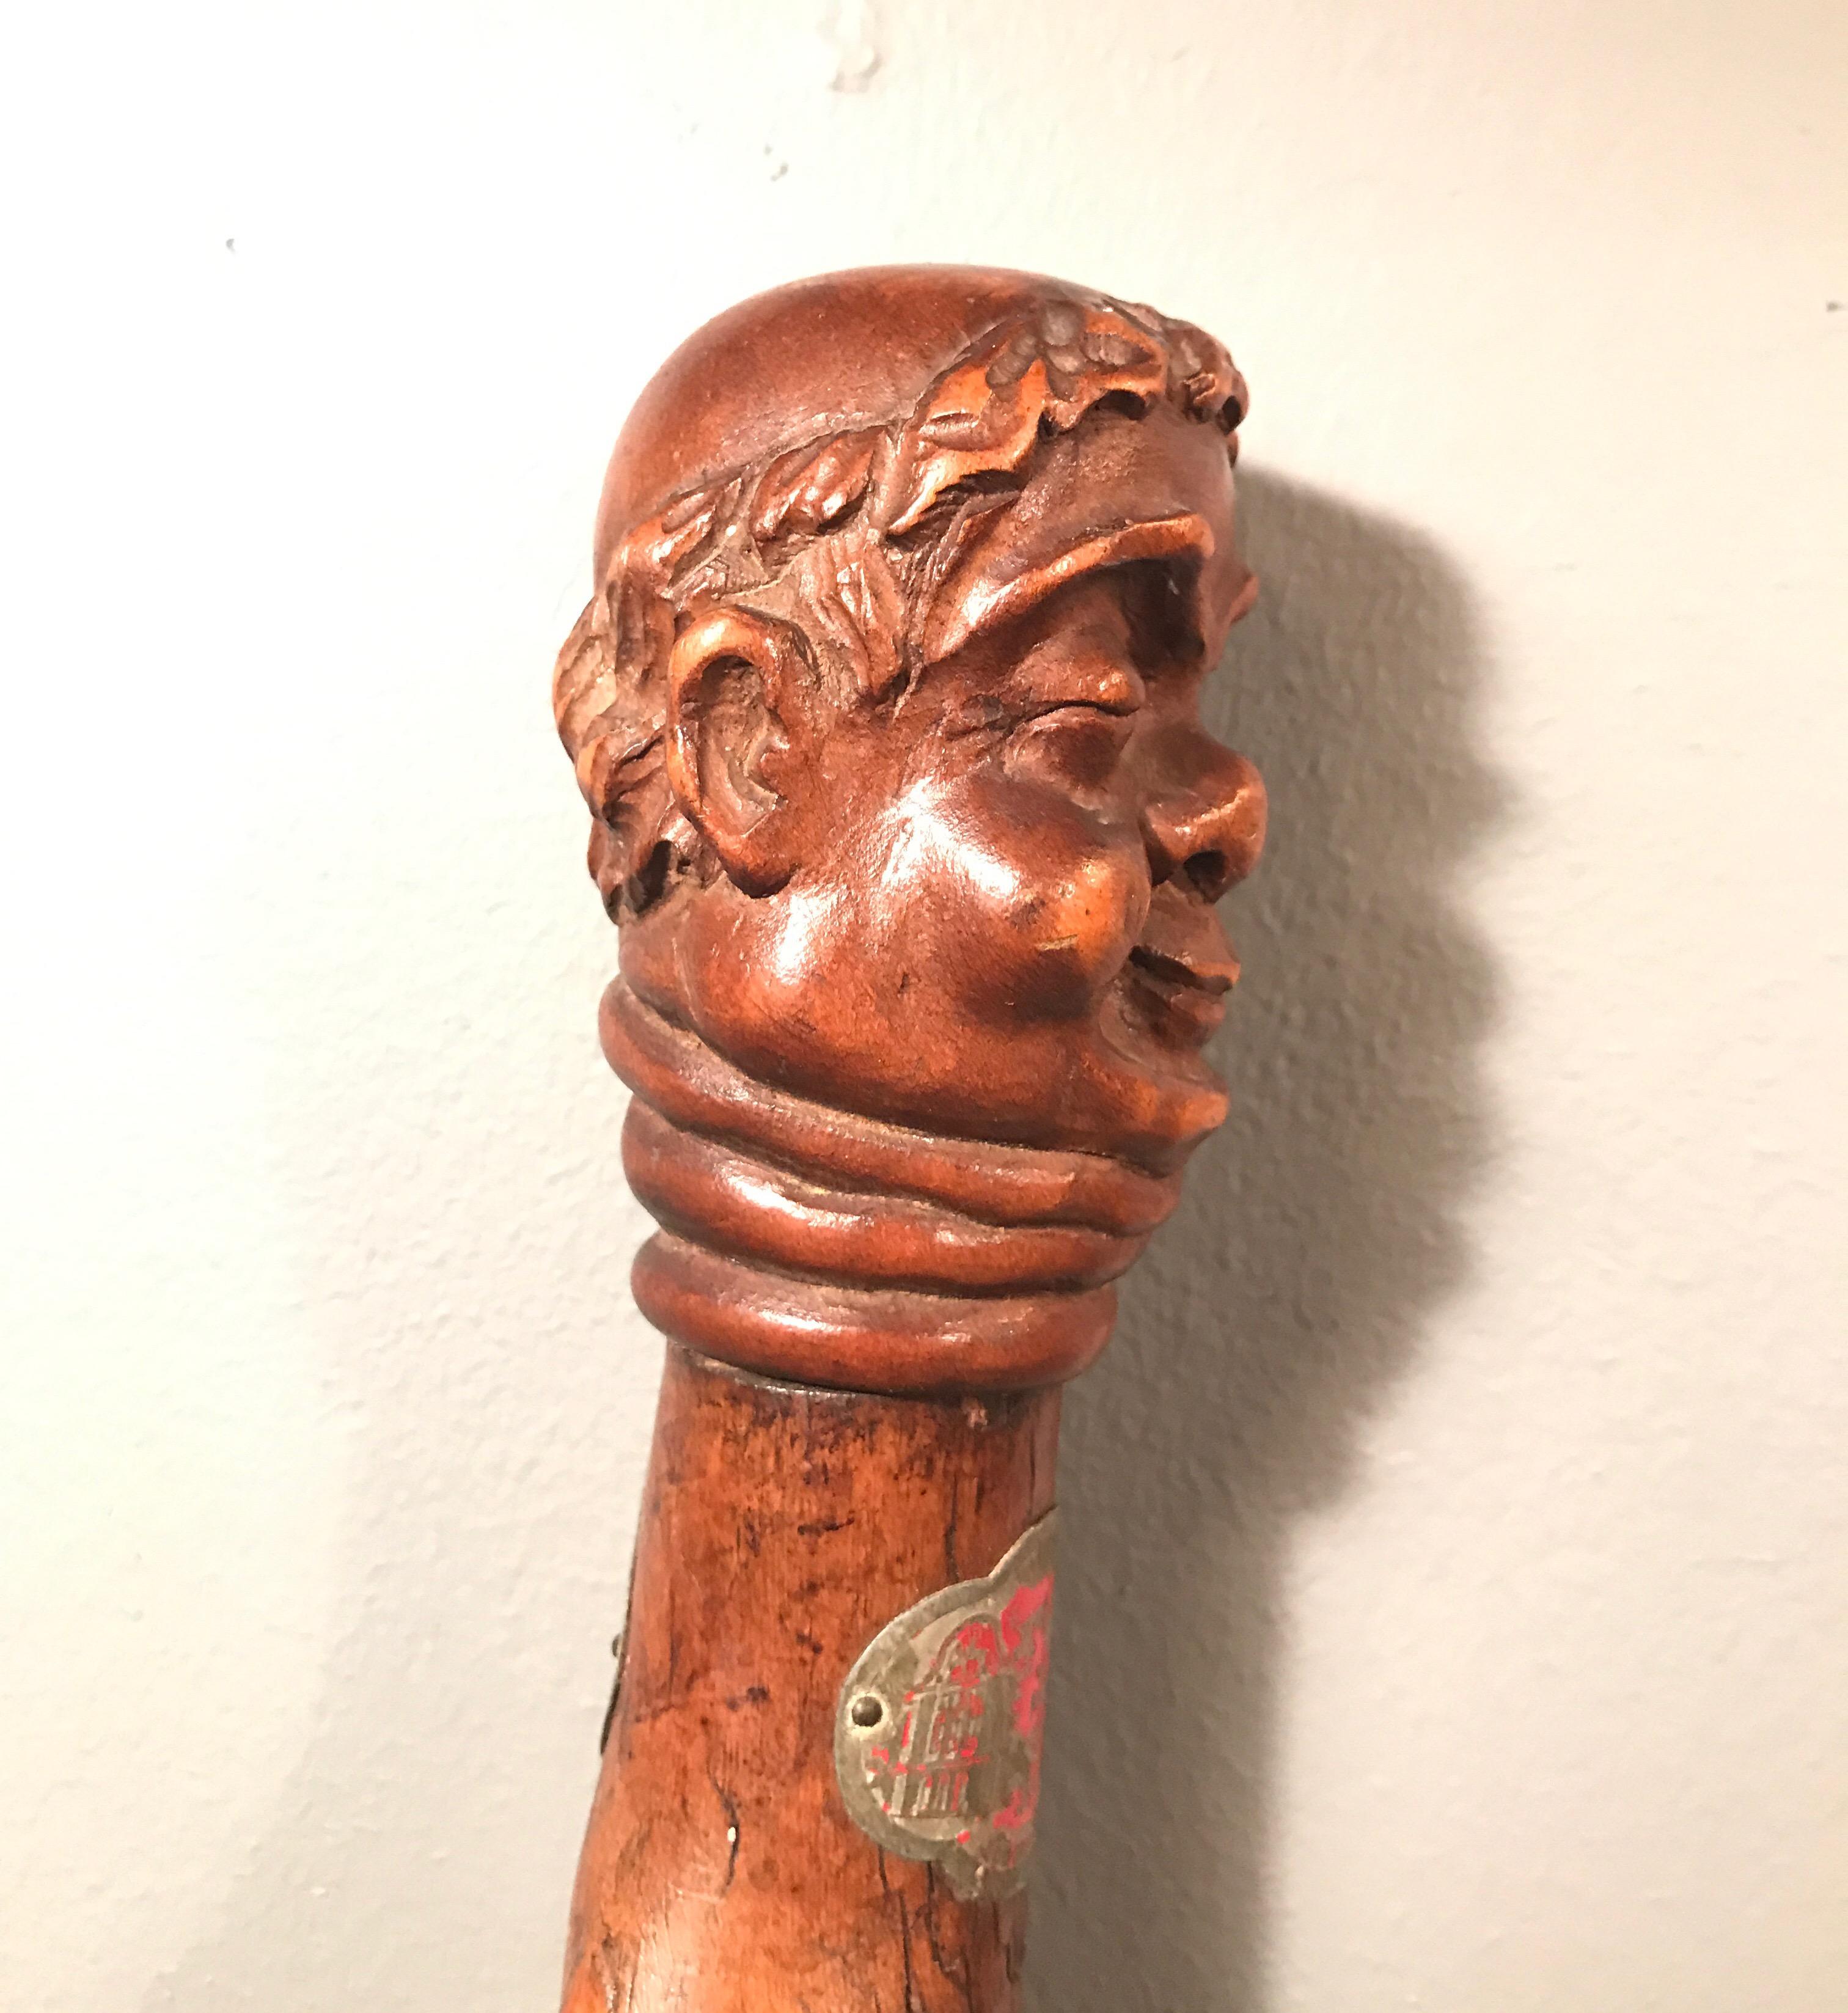 Antique walking stick dated 1836 and made in Denmark 
Carved out of a beautiful piece of fruitwood 
Could very well have been from a monastery 
Decorated with tin badges from European towns
Such a unique piece.